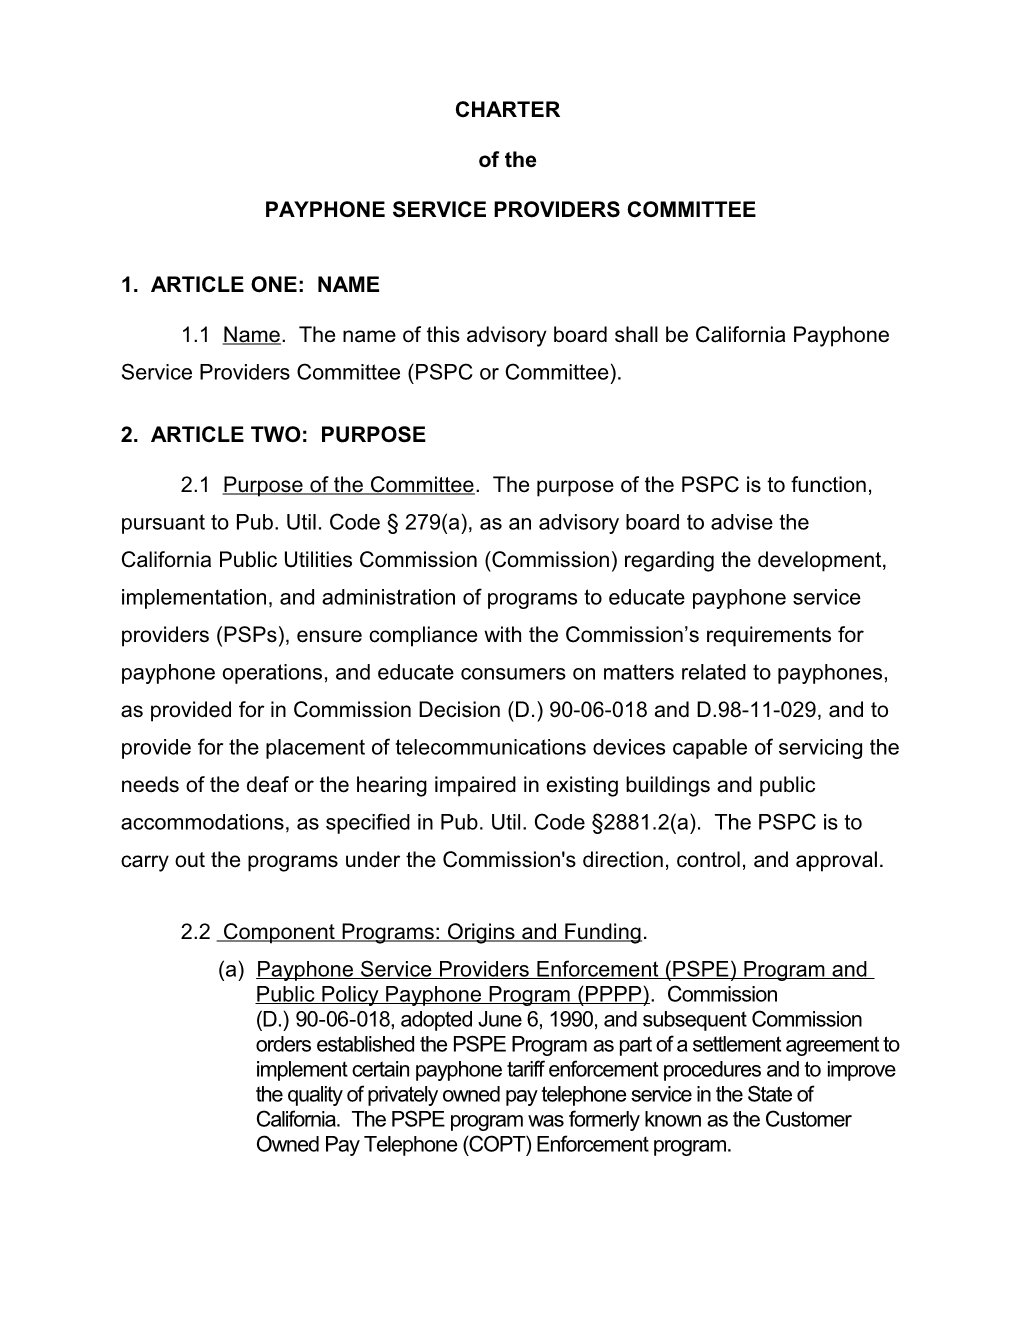 Payphone Service Providers Committee